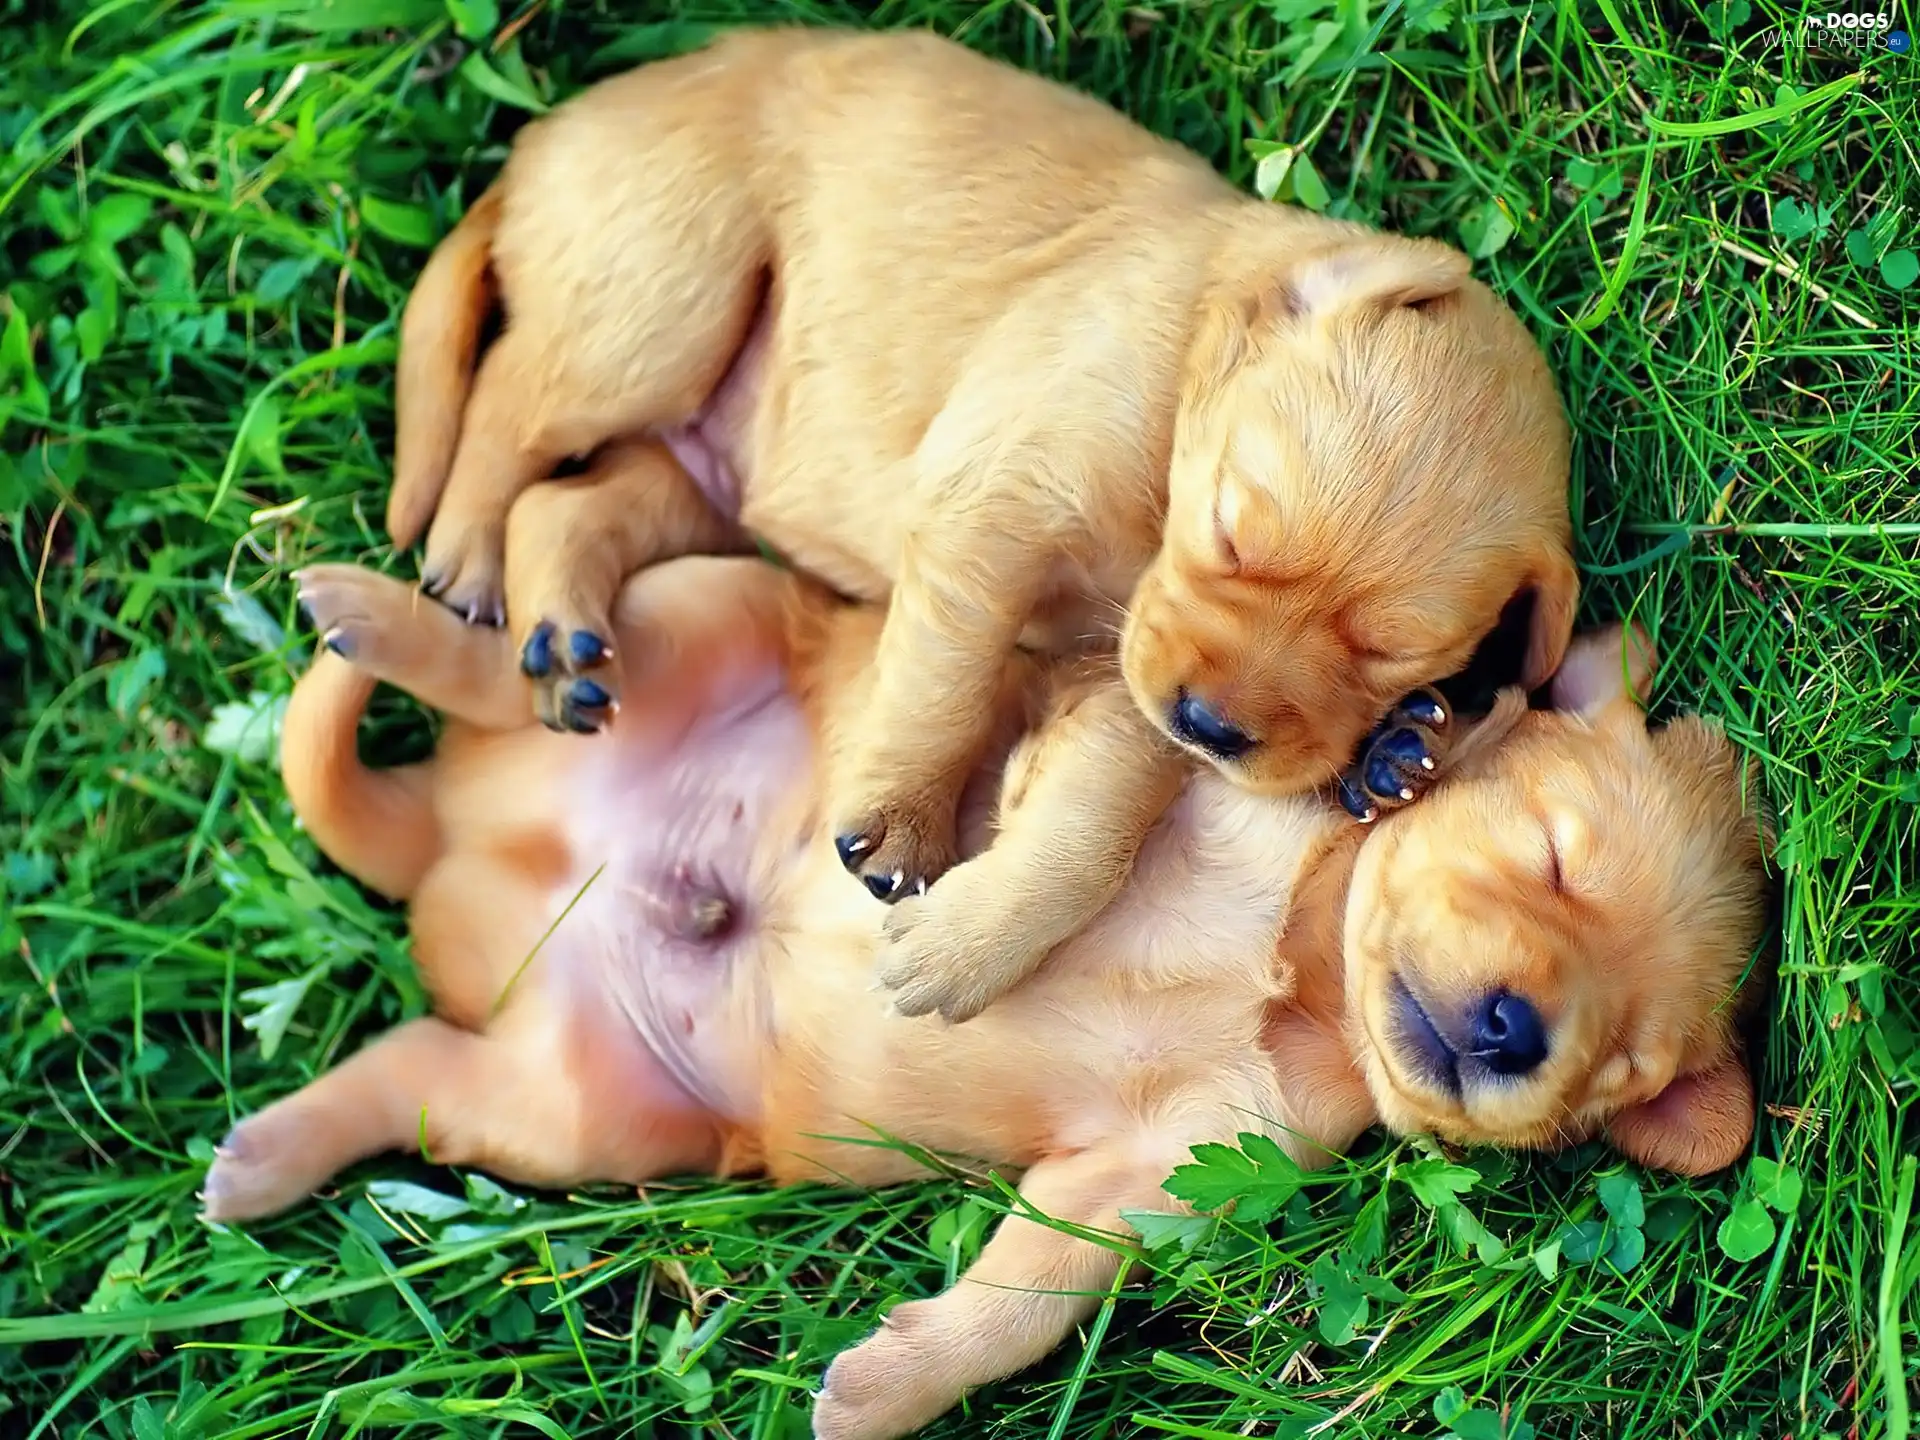 puppies, Sleeping, Two cars, grass, little doggies